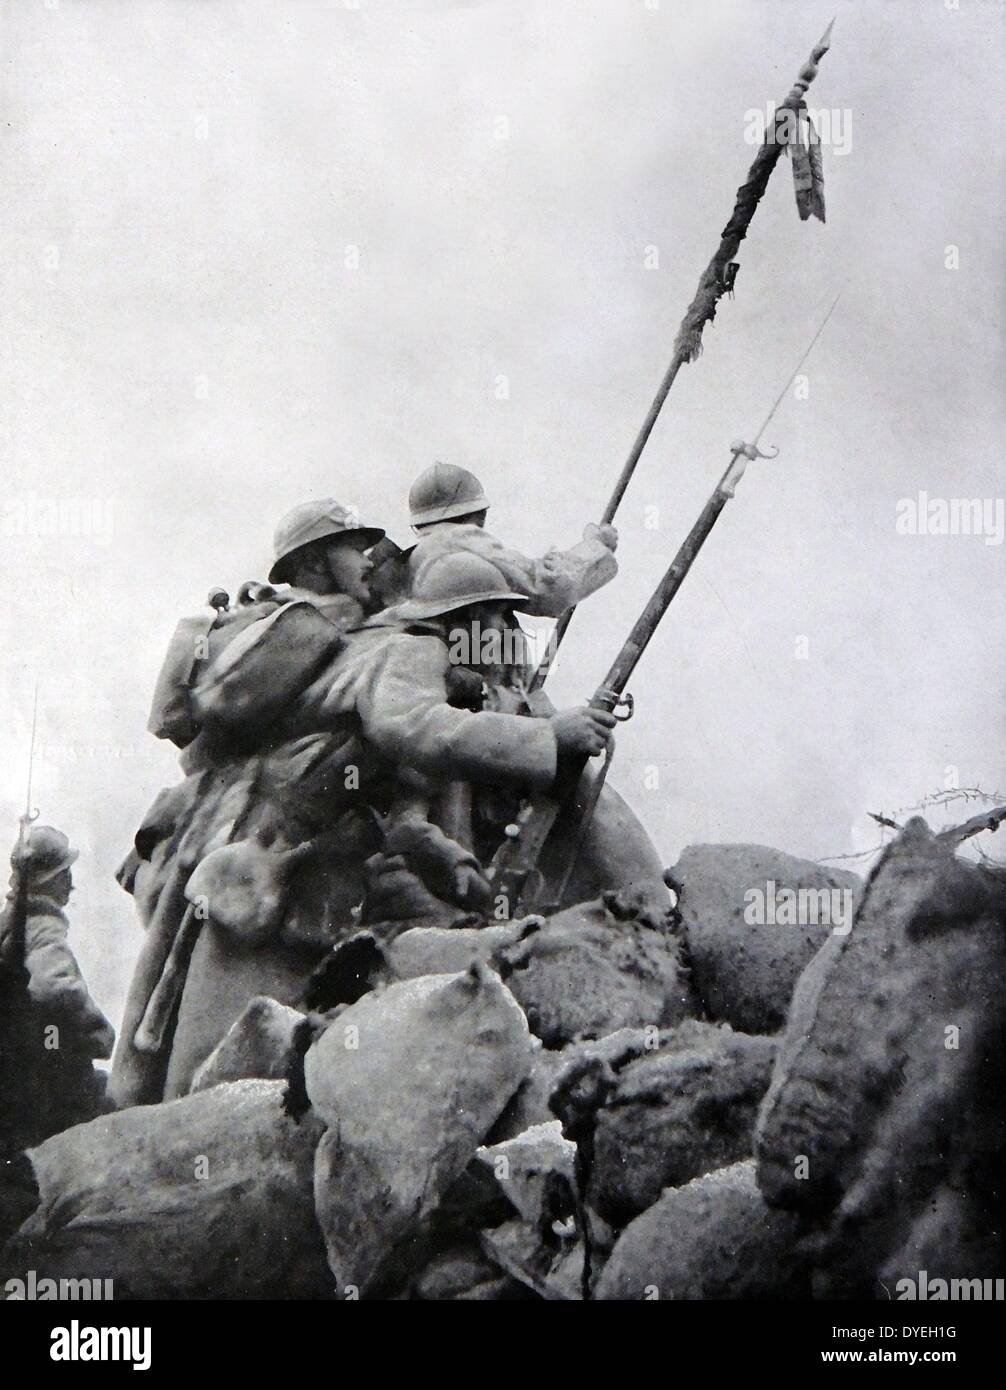 World War 1 - Heroic French soldiers rise over the top of their barricades towards the German line of fire during the First Battle of the Marne 1914. An Officer can be seen carrying a damaged regimental standard to rally the troops. Stock Photo